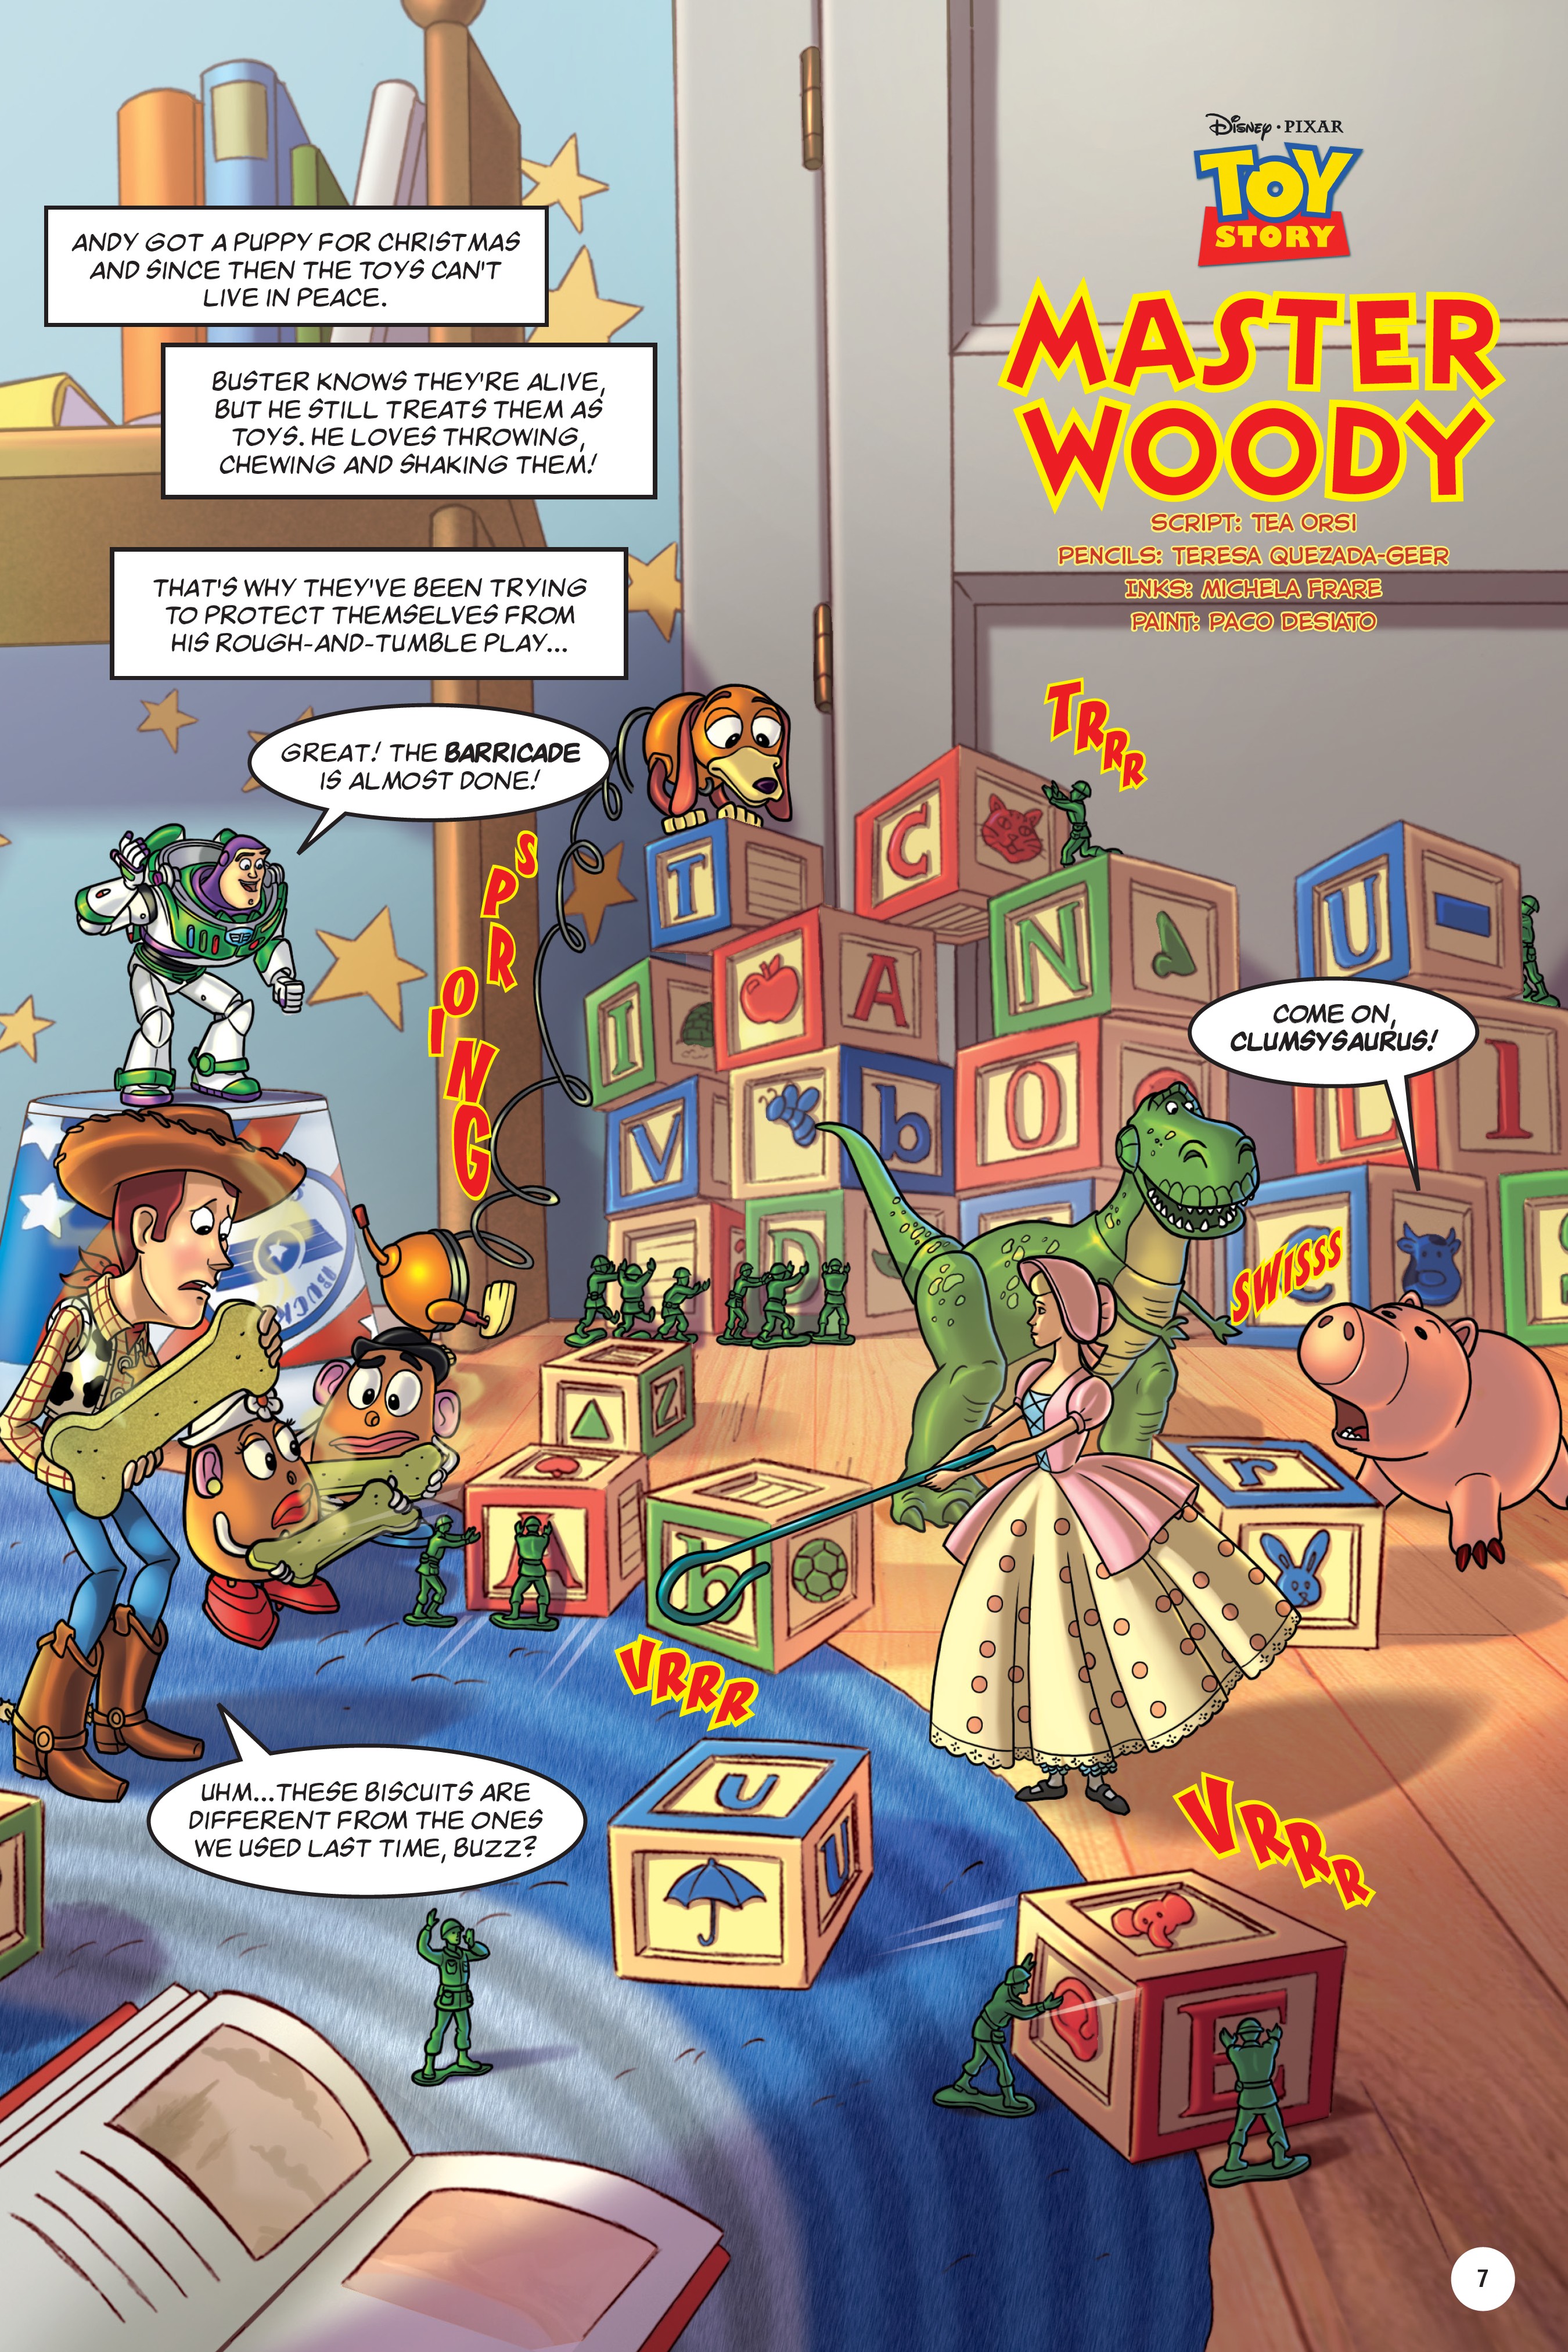 Porn Gay Toy Story - Disney Pixar Toy Story Adventures Tpb 1 Part 1 | Read Disney Pixar Toy Story  Adventures Tpb 1 Part 1 comic online in high quality. Read Full Comic  online for free -